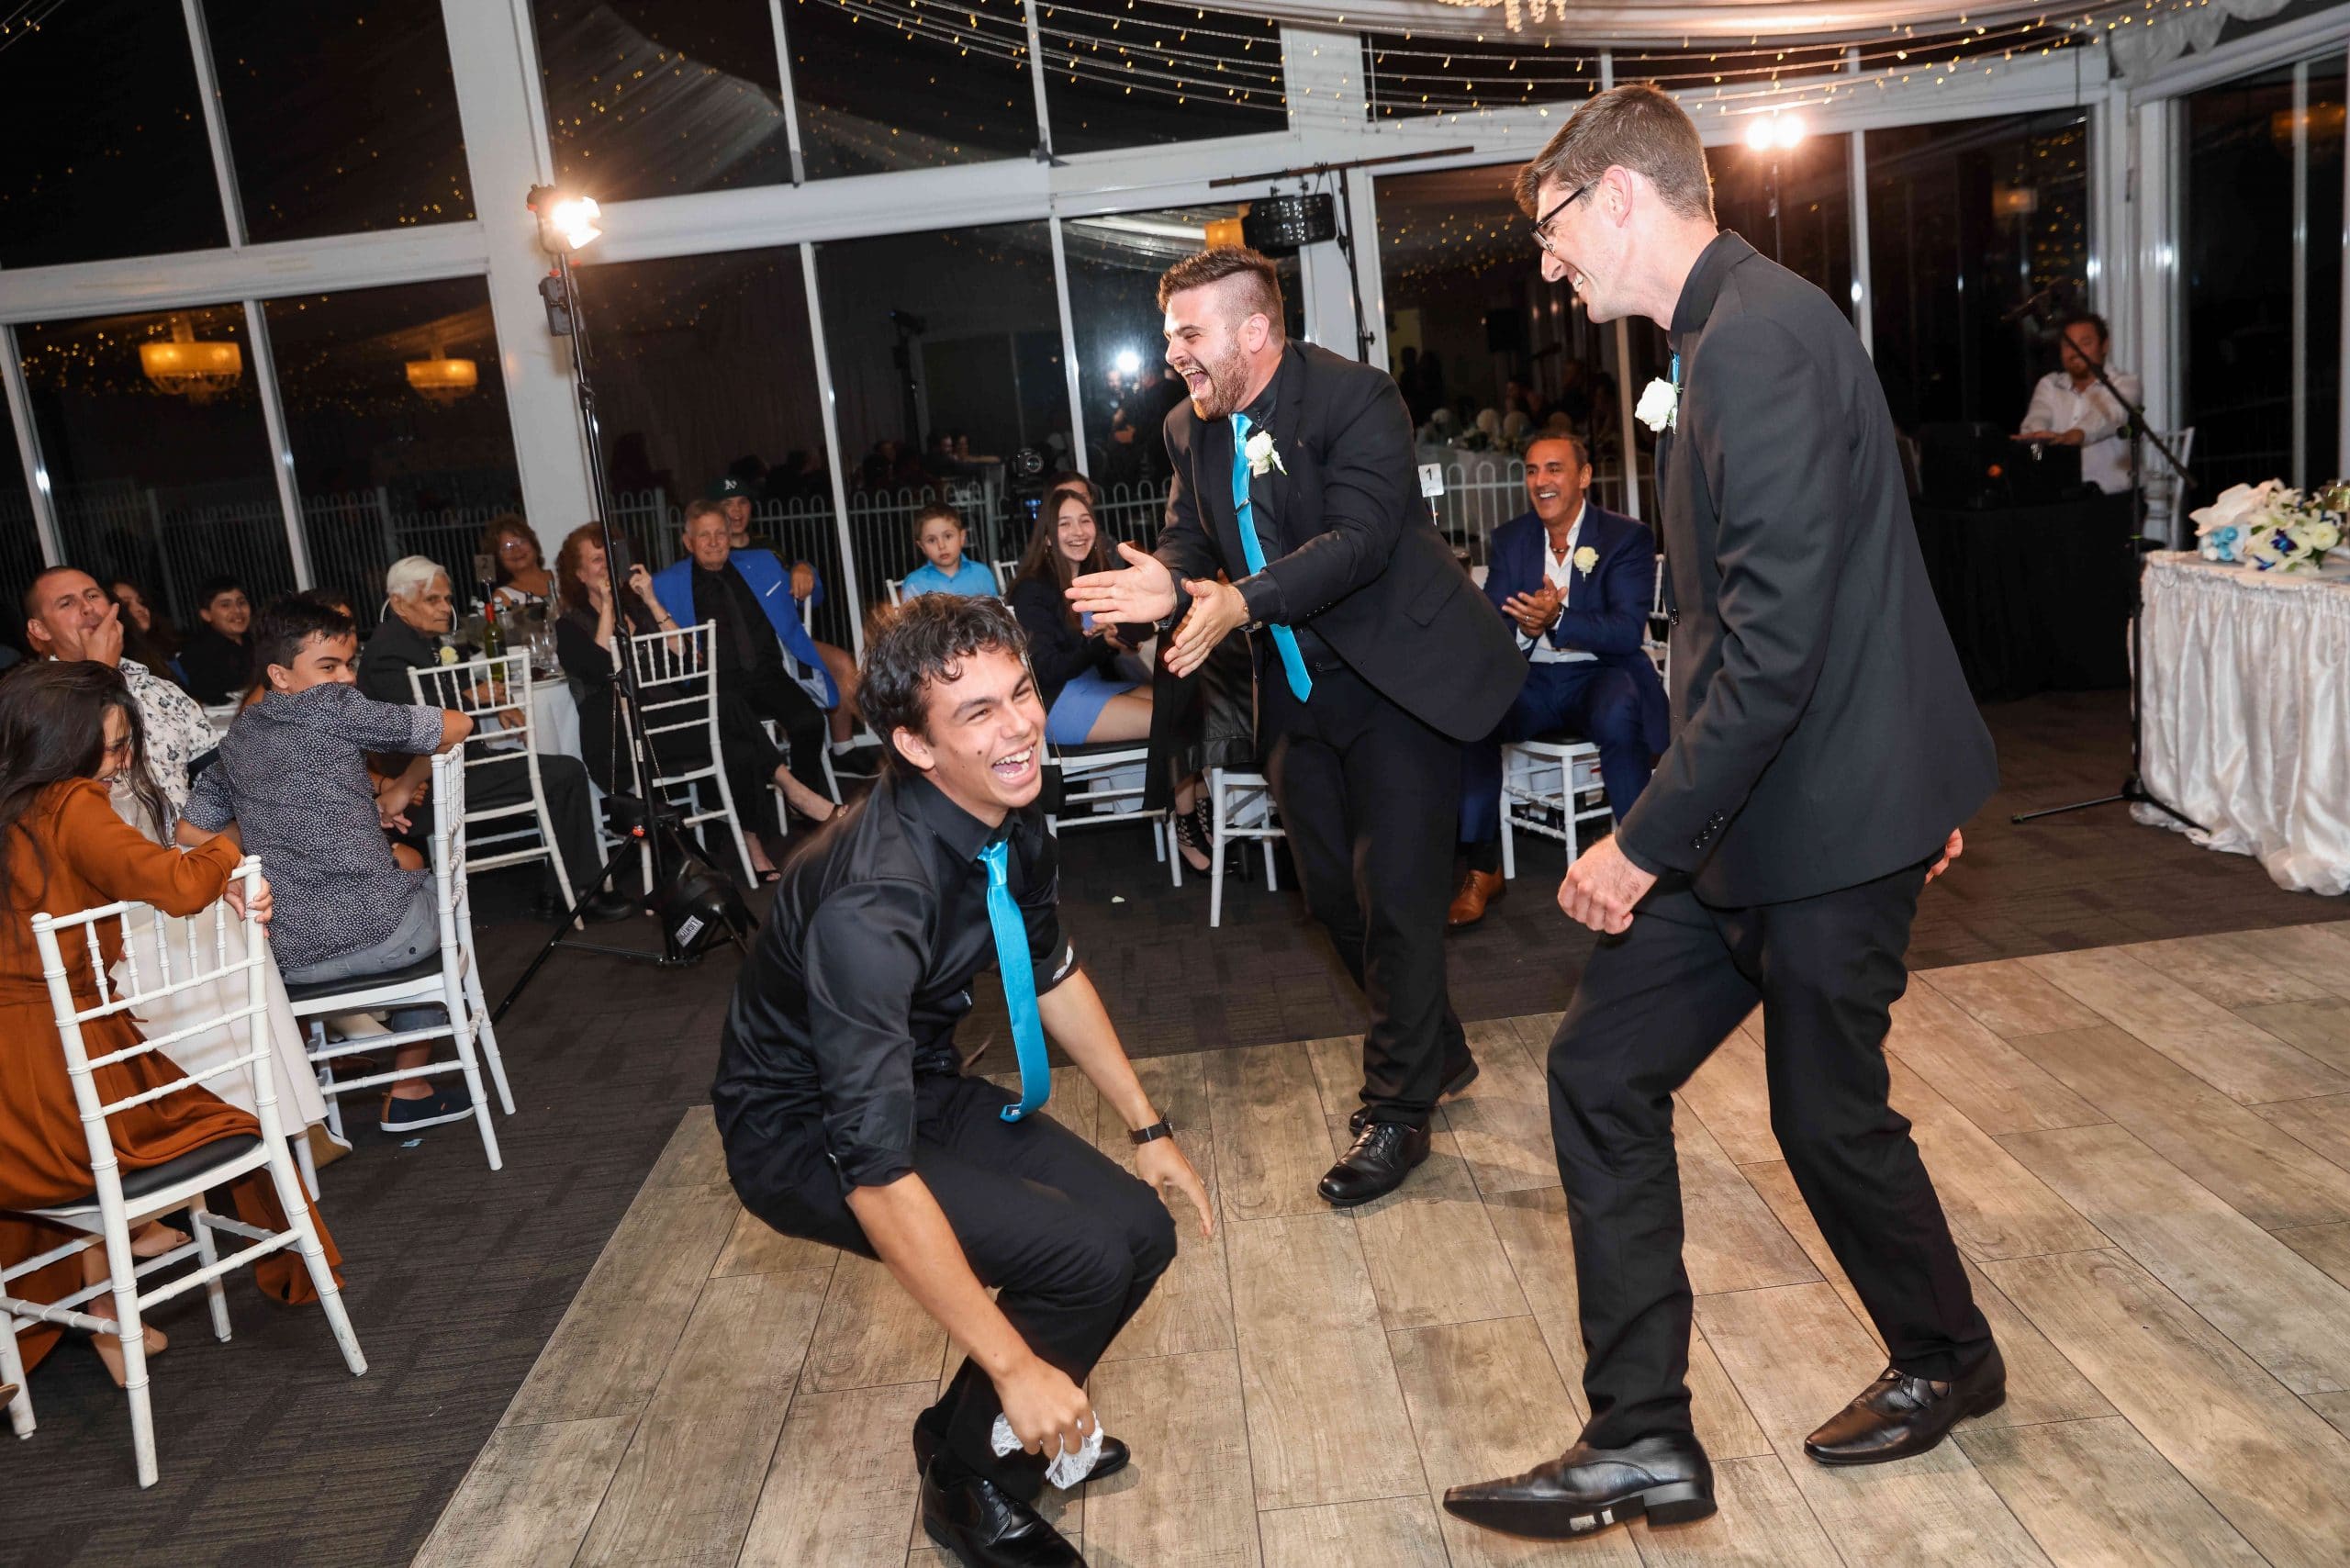 Nathan Cassar laughing with two other men n the dancefloor